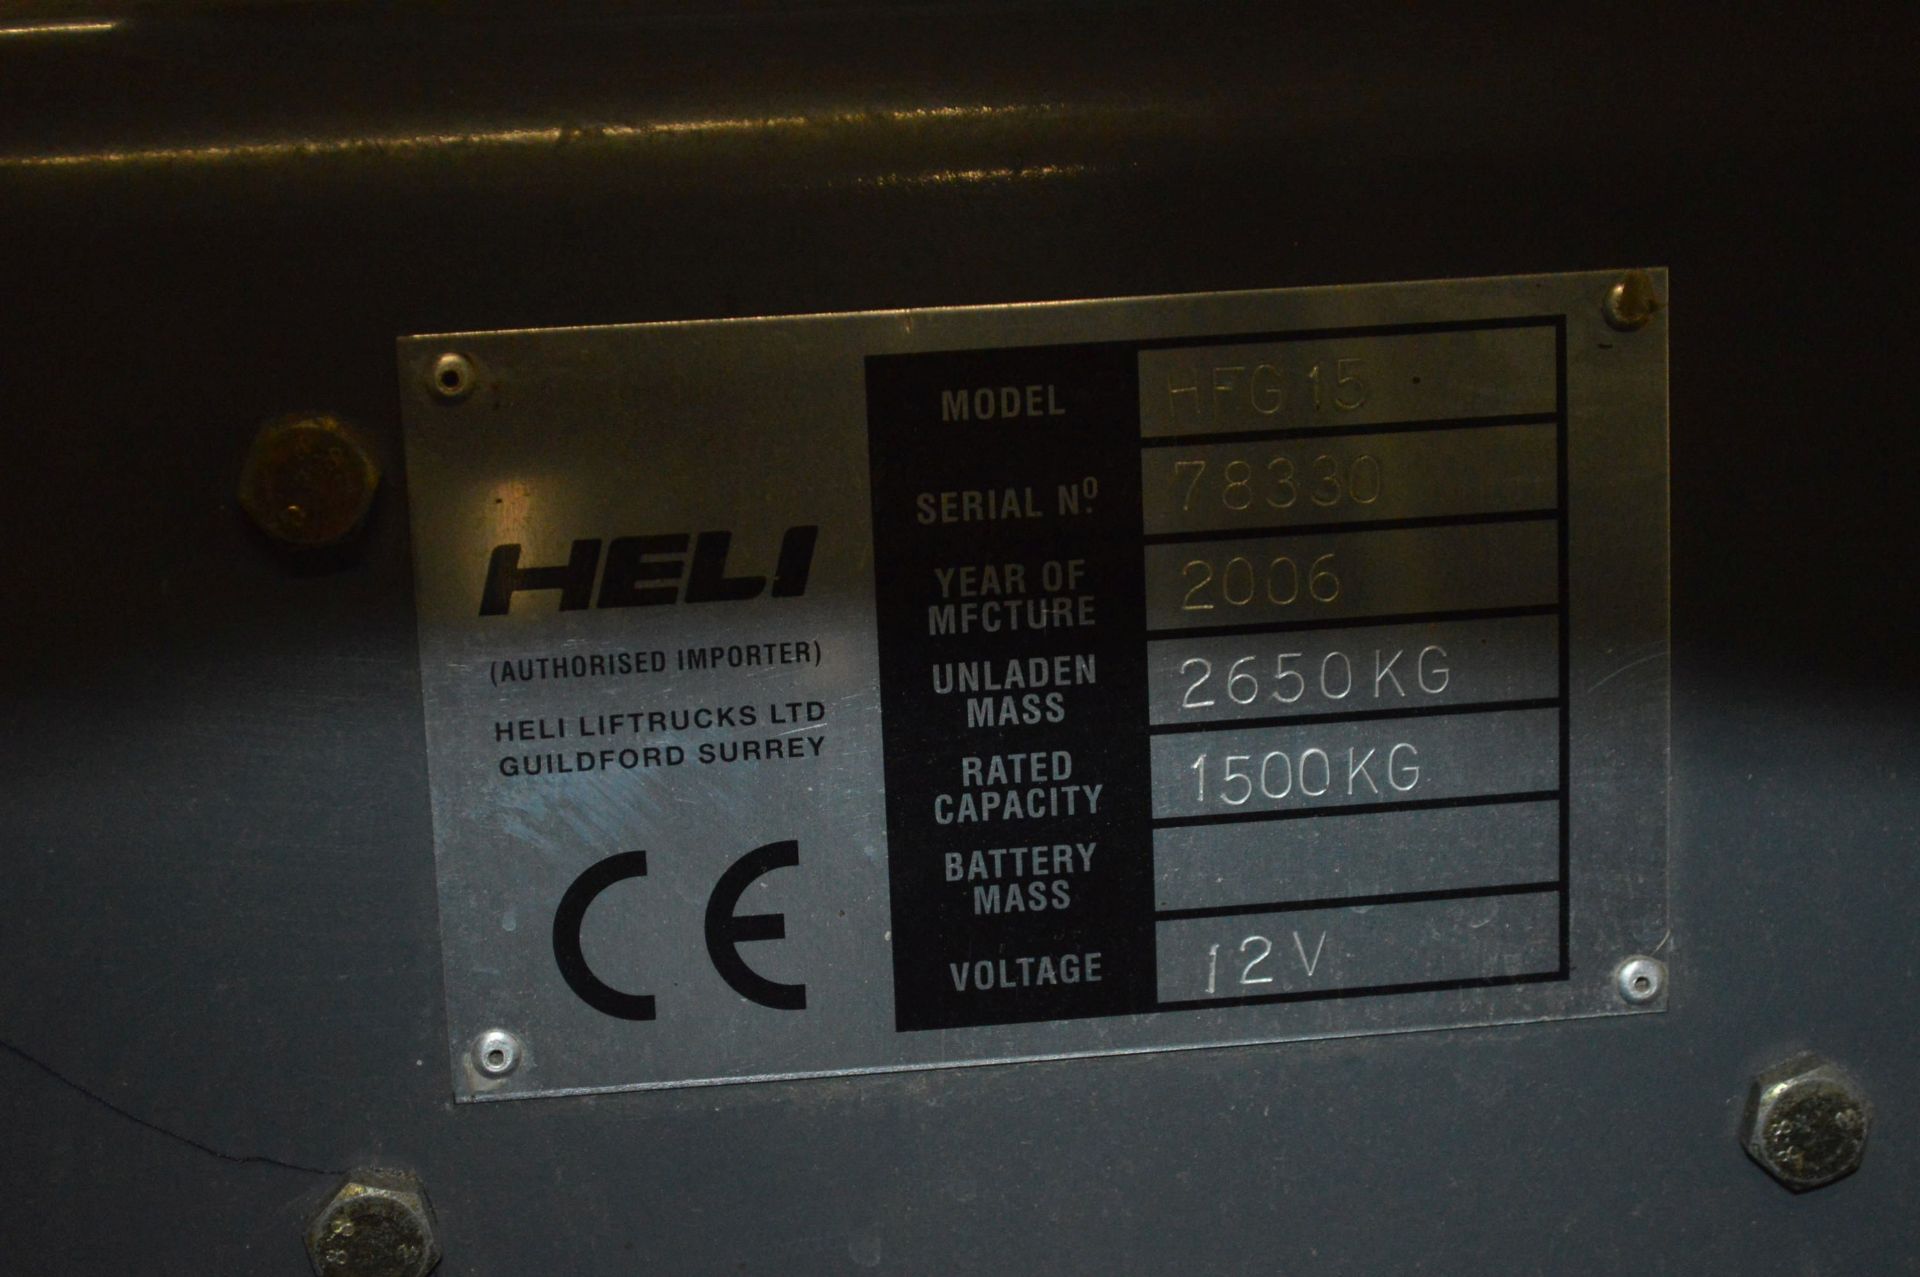 Heli HFG15 H2000 SERIES 1500kg LPG ENGINE FORK LIFT TRUCK, serial no. 78330, year of manufacture - Image 5 of 5